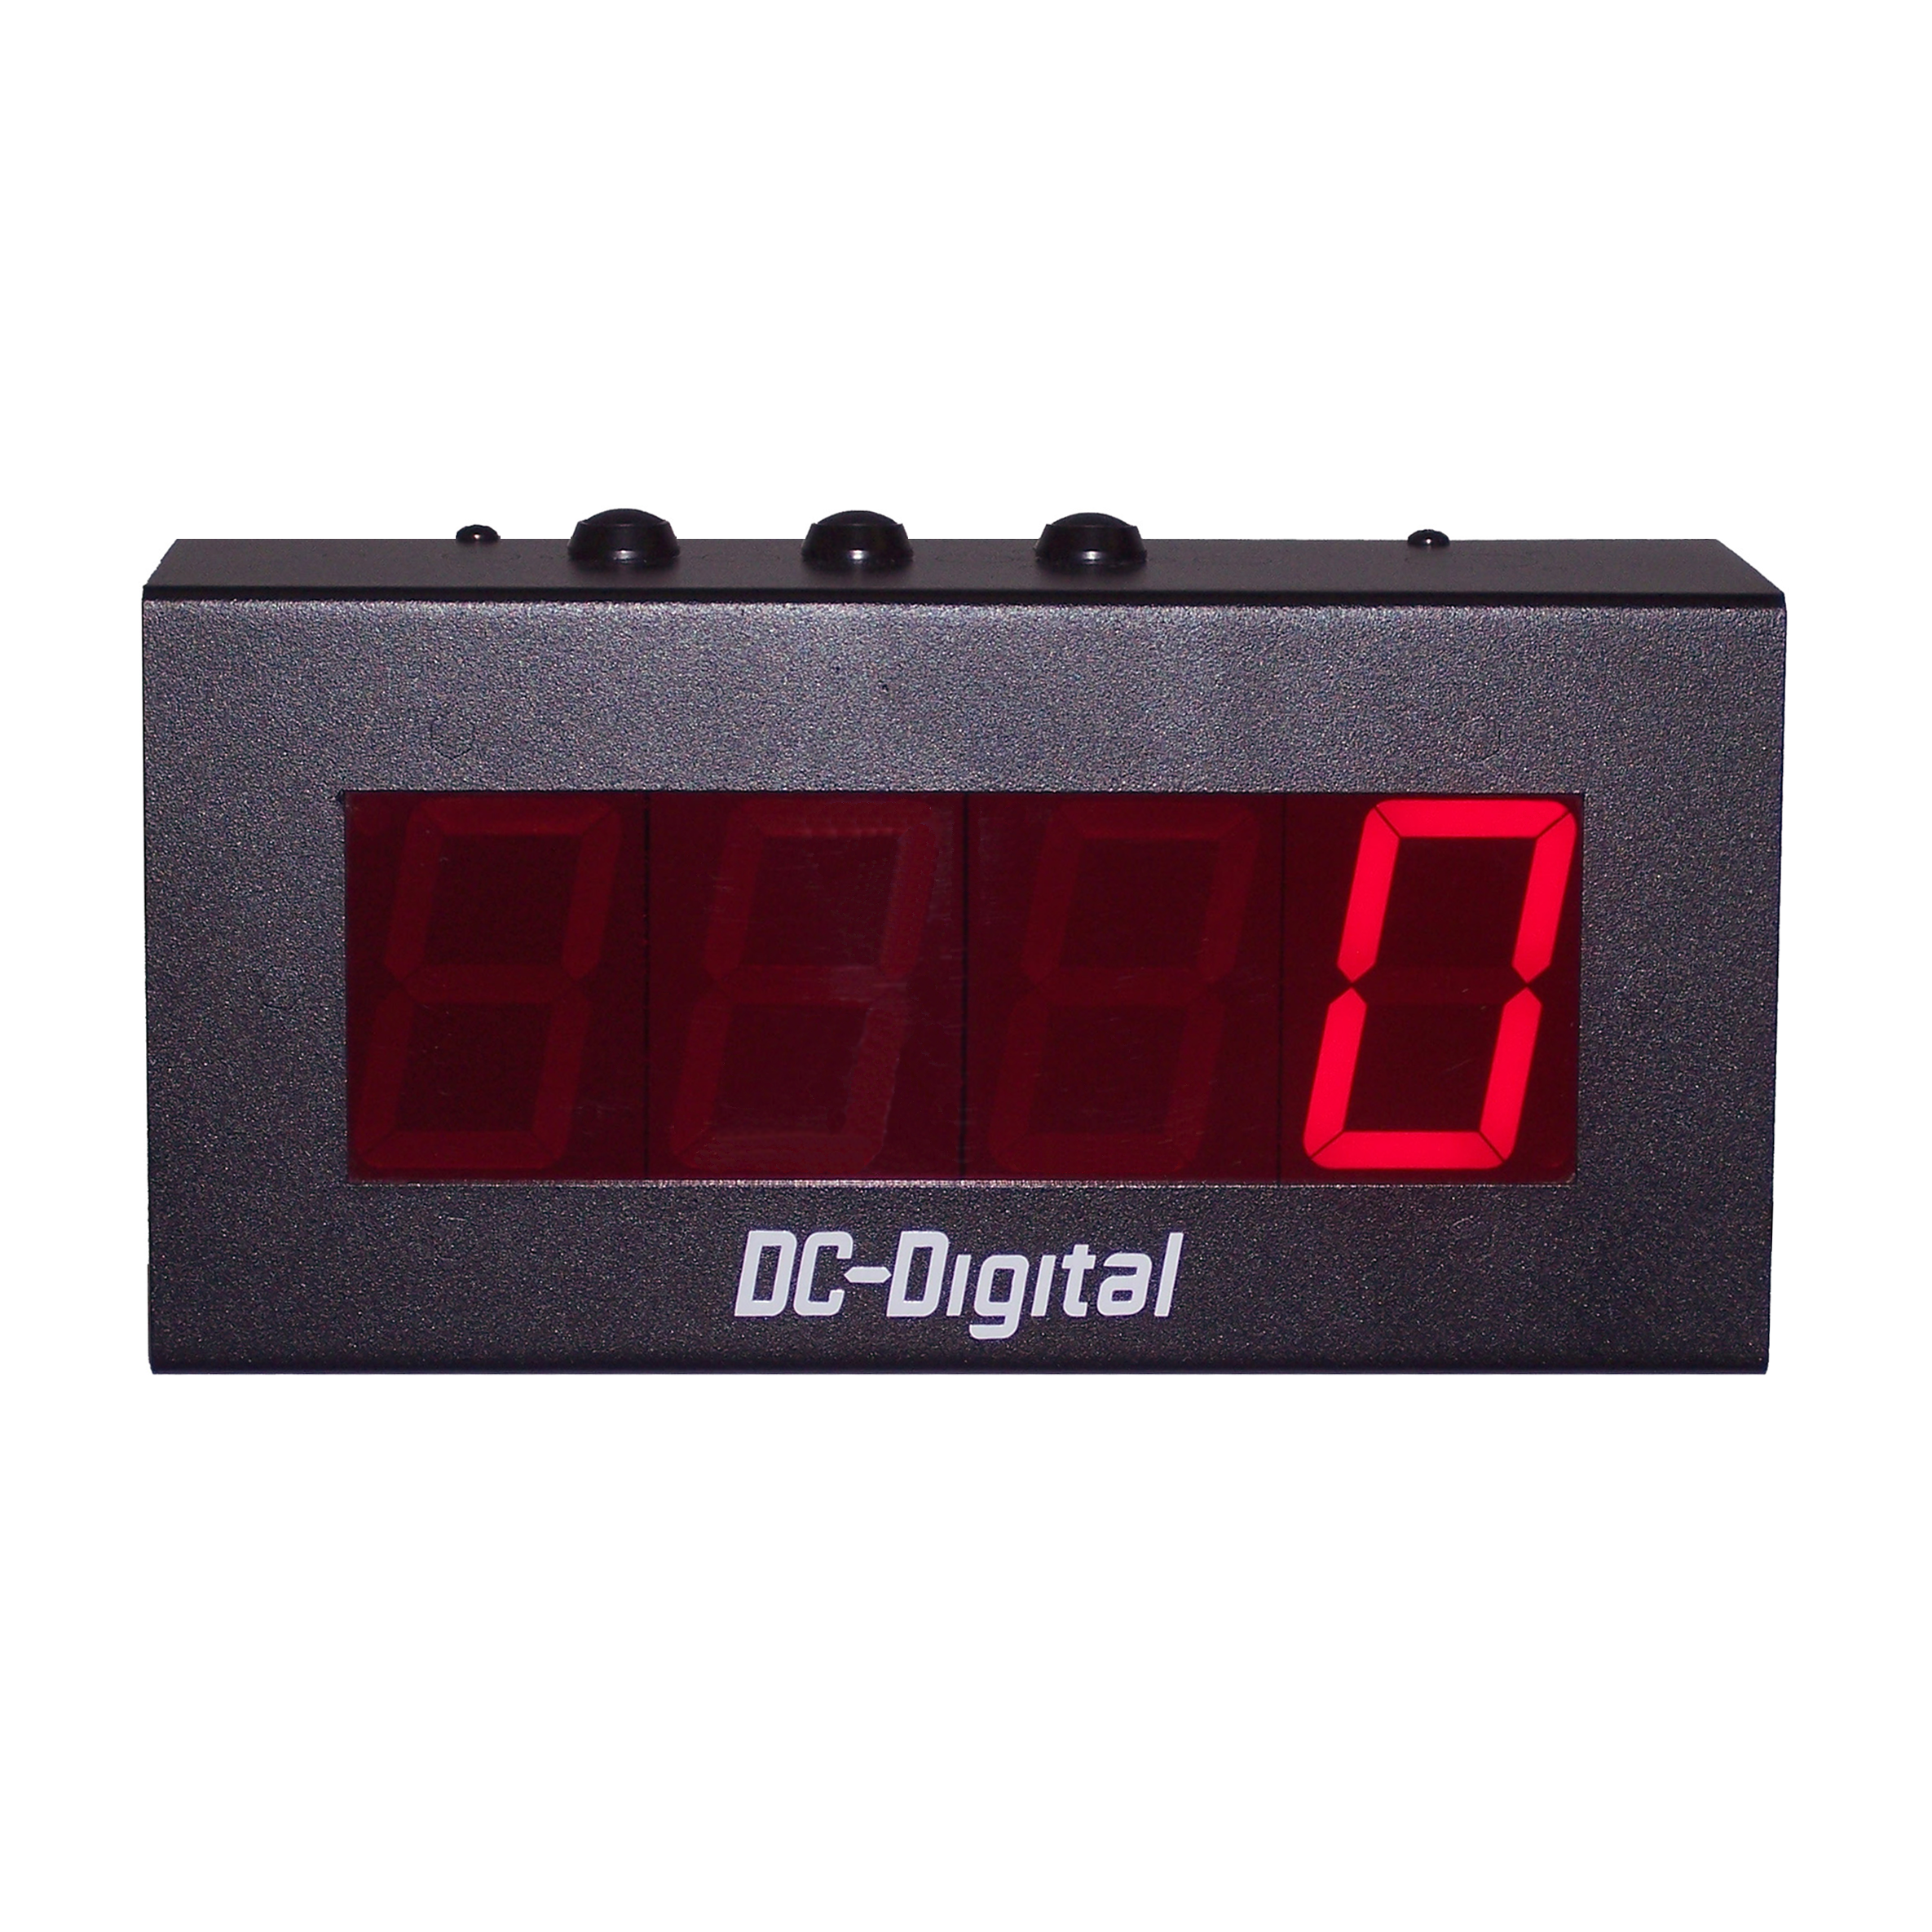 DC-25C) Push-Button Controlled Digital Counter, 2.3 Inch Digits